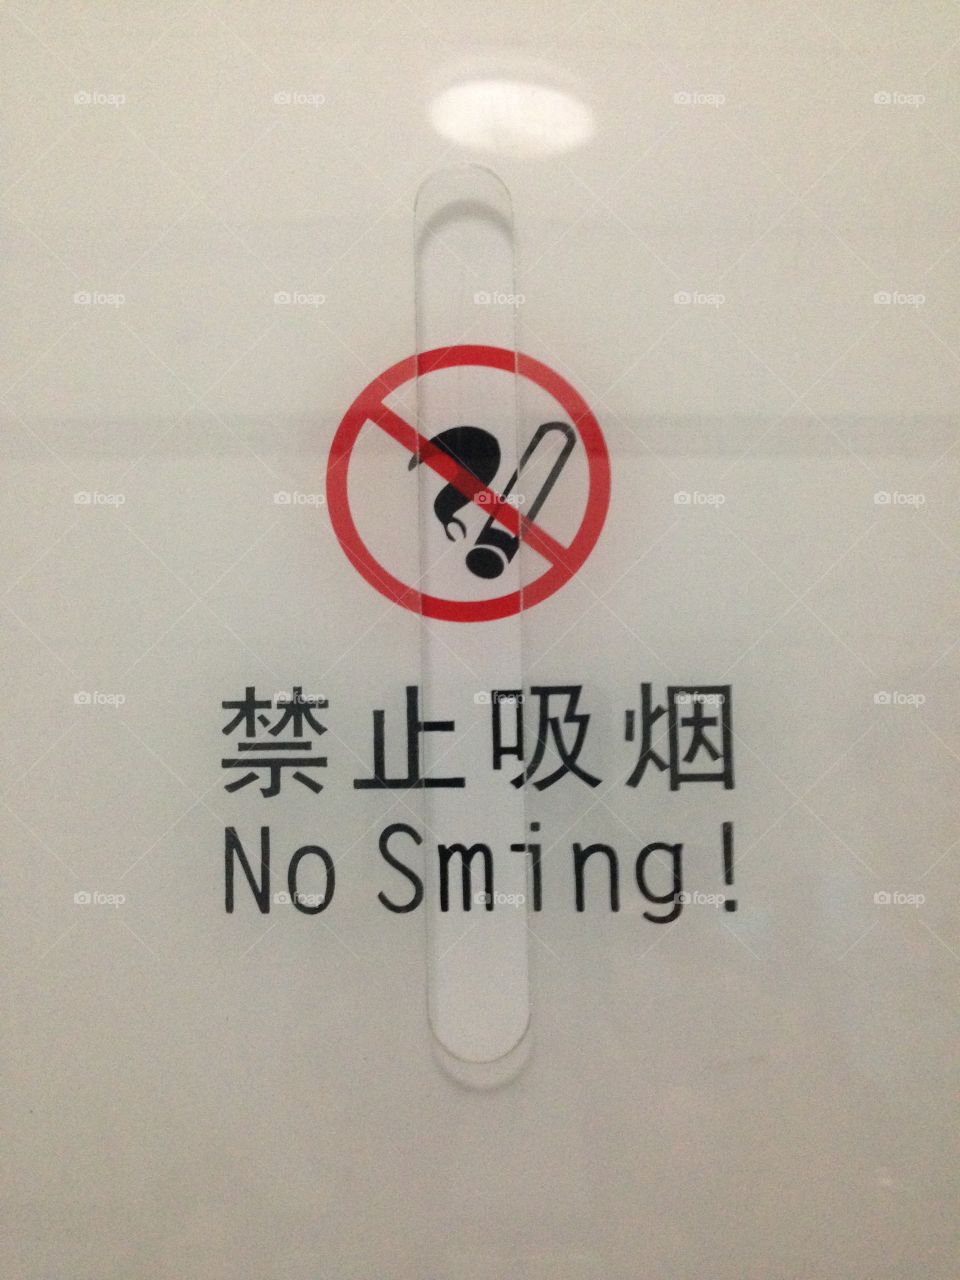 No smoking sign in China with a typo; no sming. A good start of a new year, no smoking. New Years resolution.